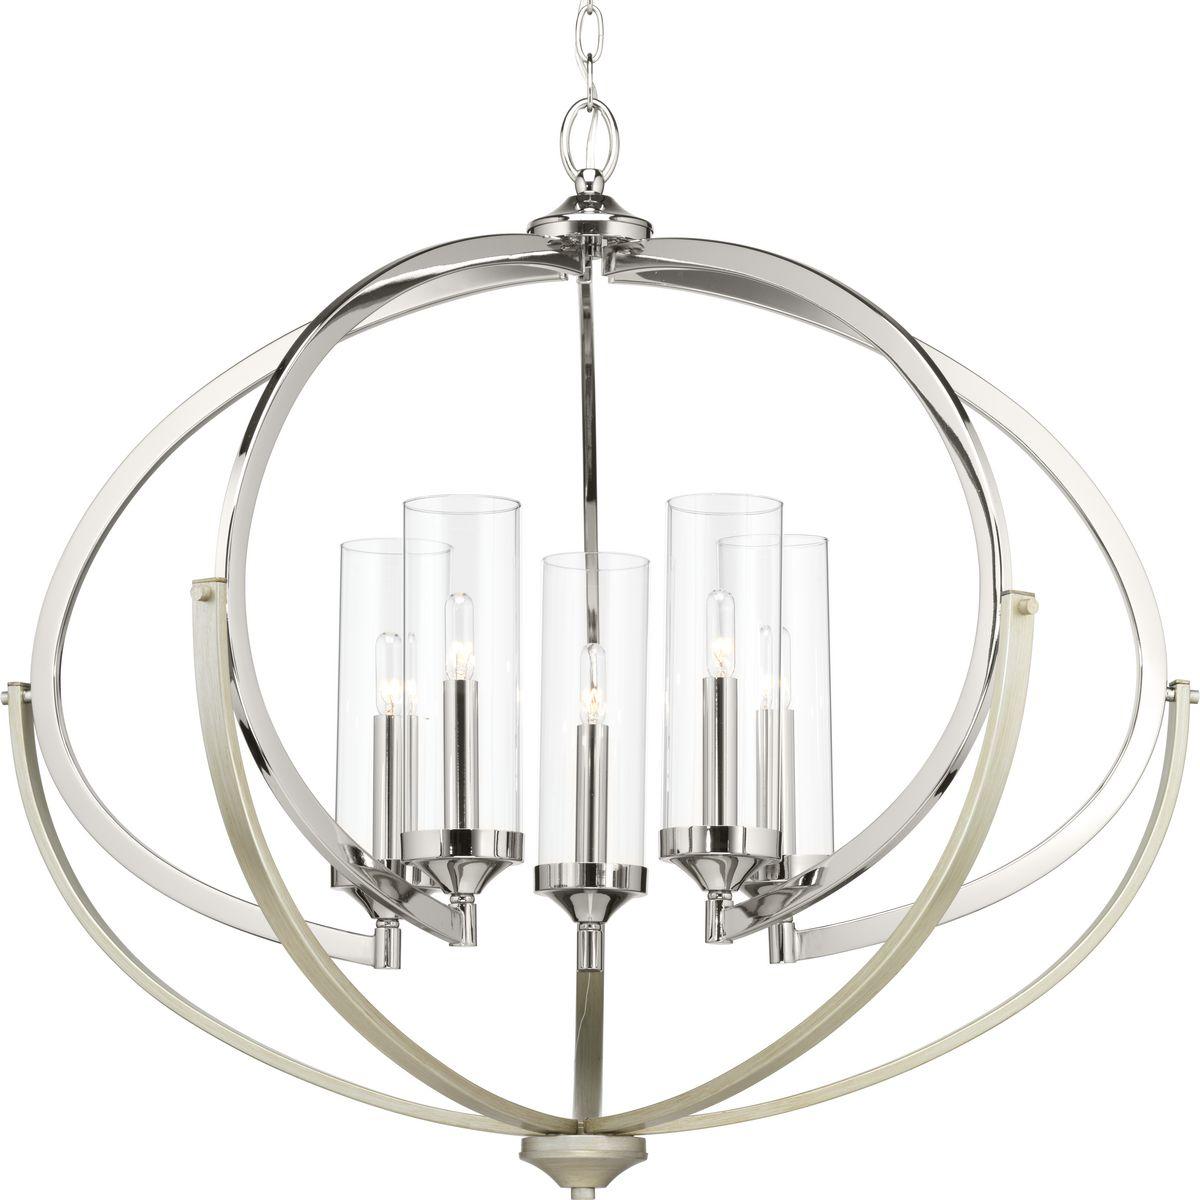 Hubbell P400117-104 Mixed finishes, such as Polished Nickel with silver ridge accents are highlighted in new versions of the popular Evoke chandelier. This updated design features an oversized oval form with candelabra lights that complement a livable Luxe style, as well as 